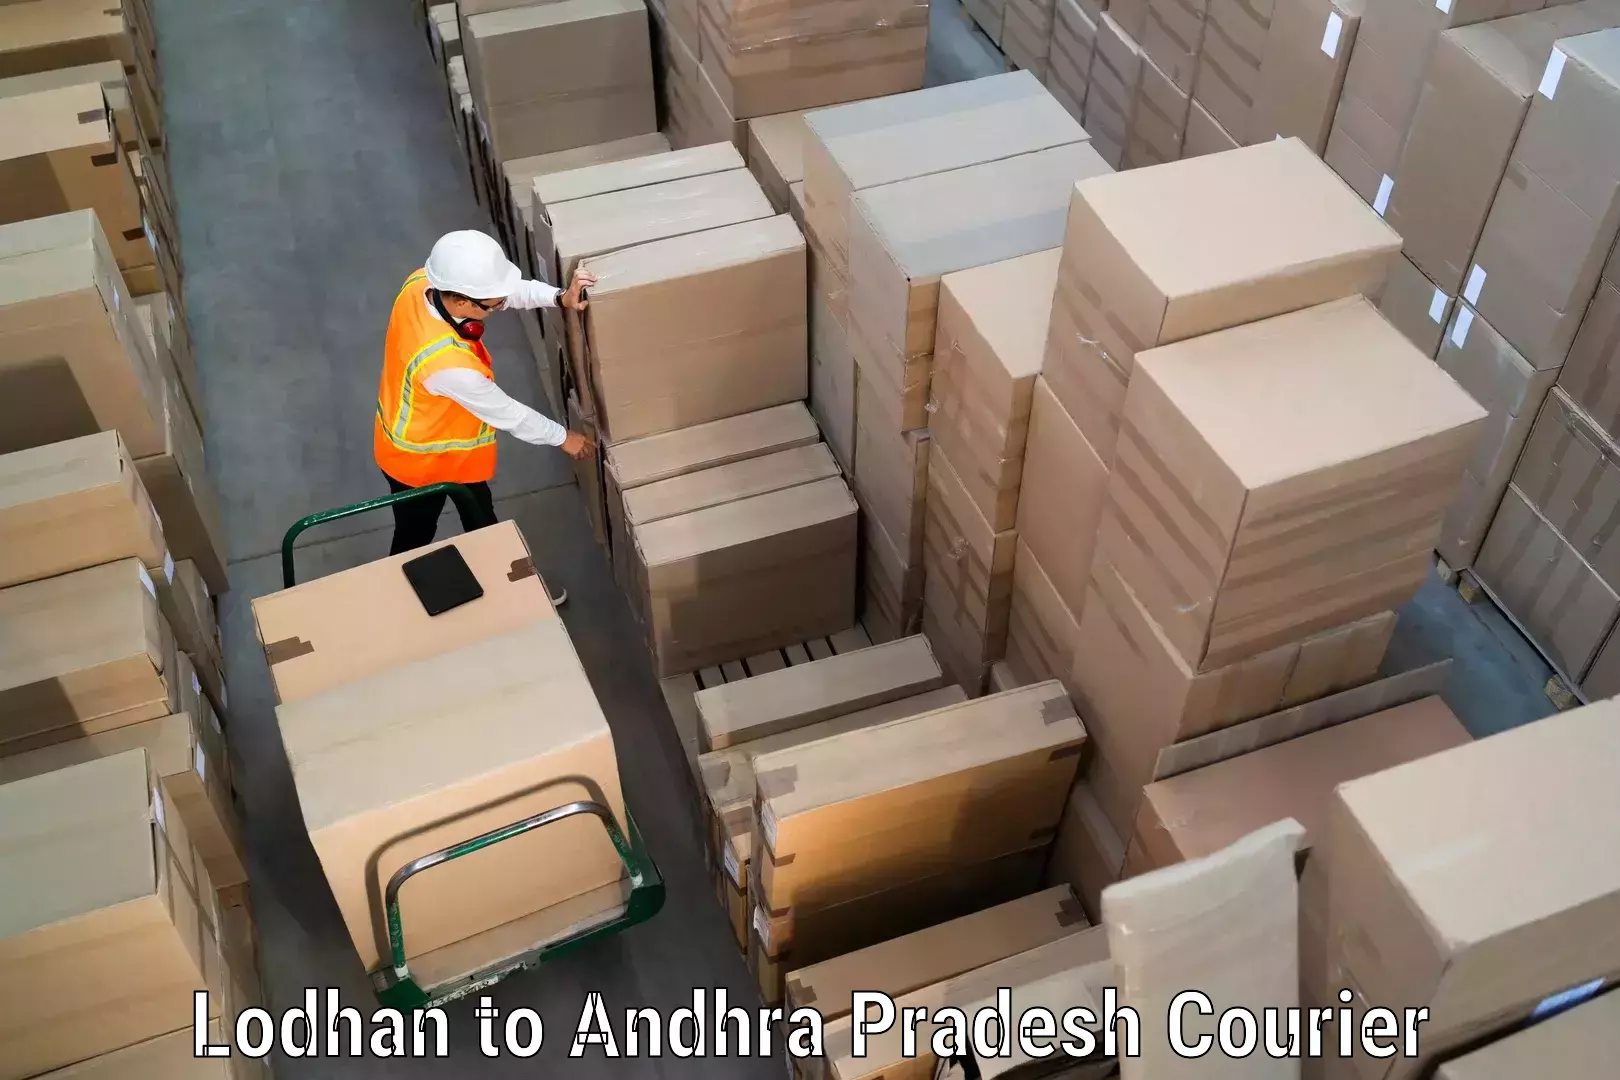 Global shipping networks Lodhan to Atchempet